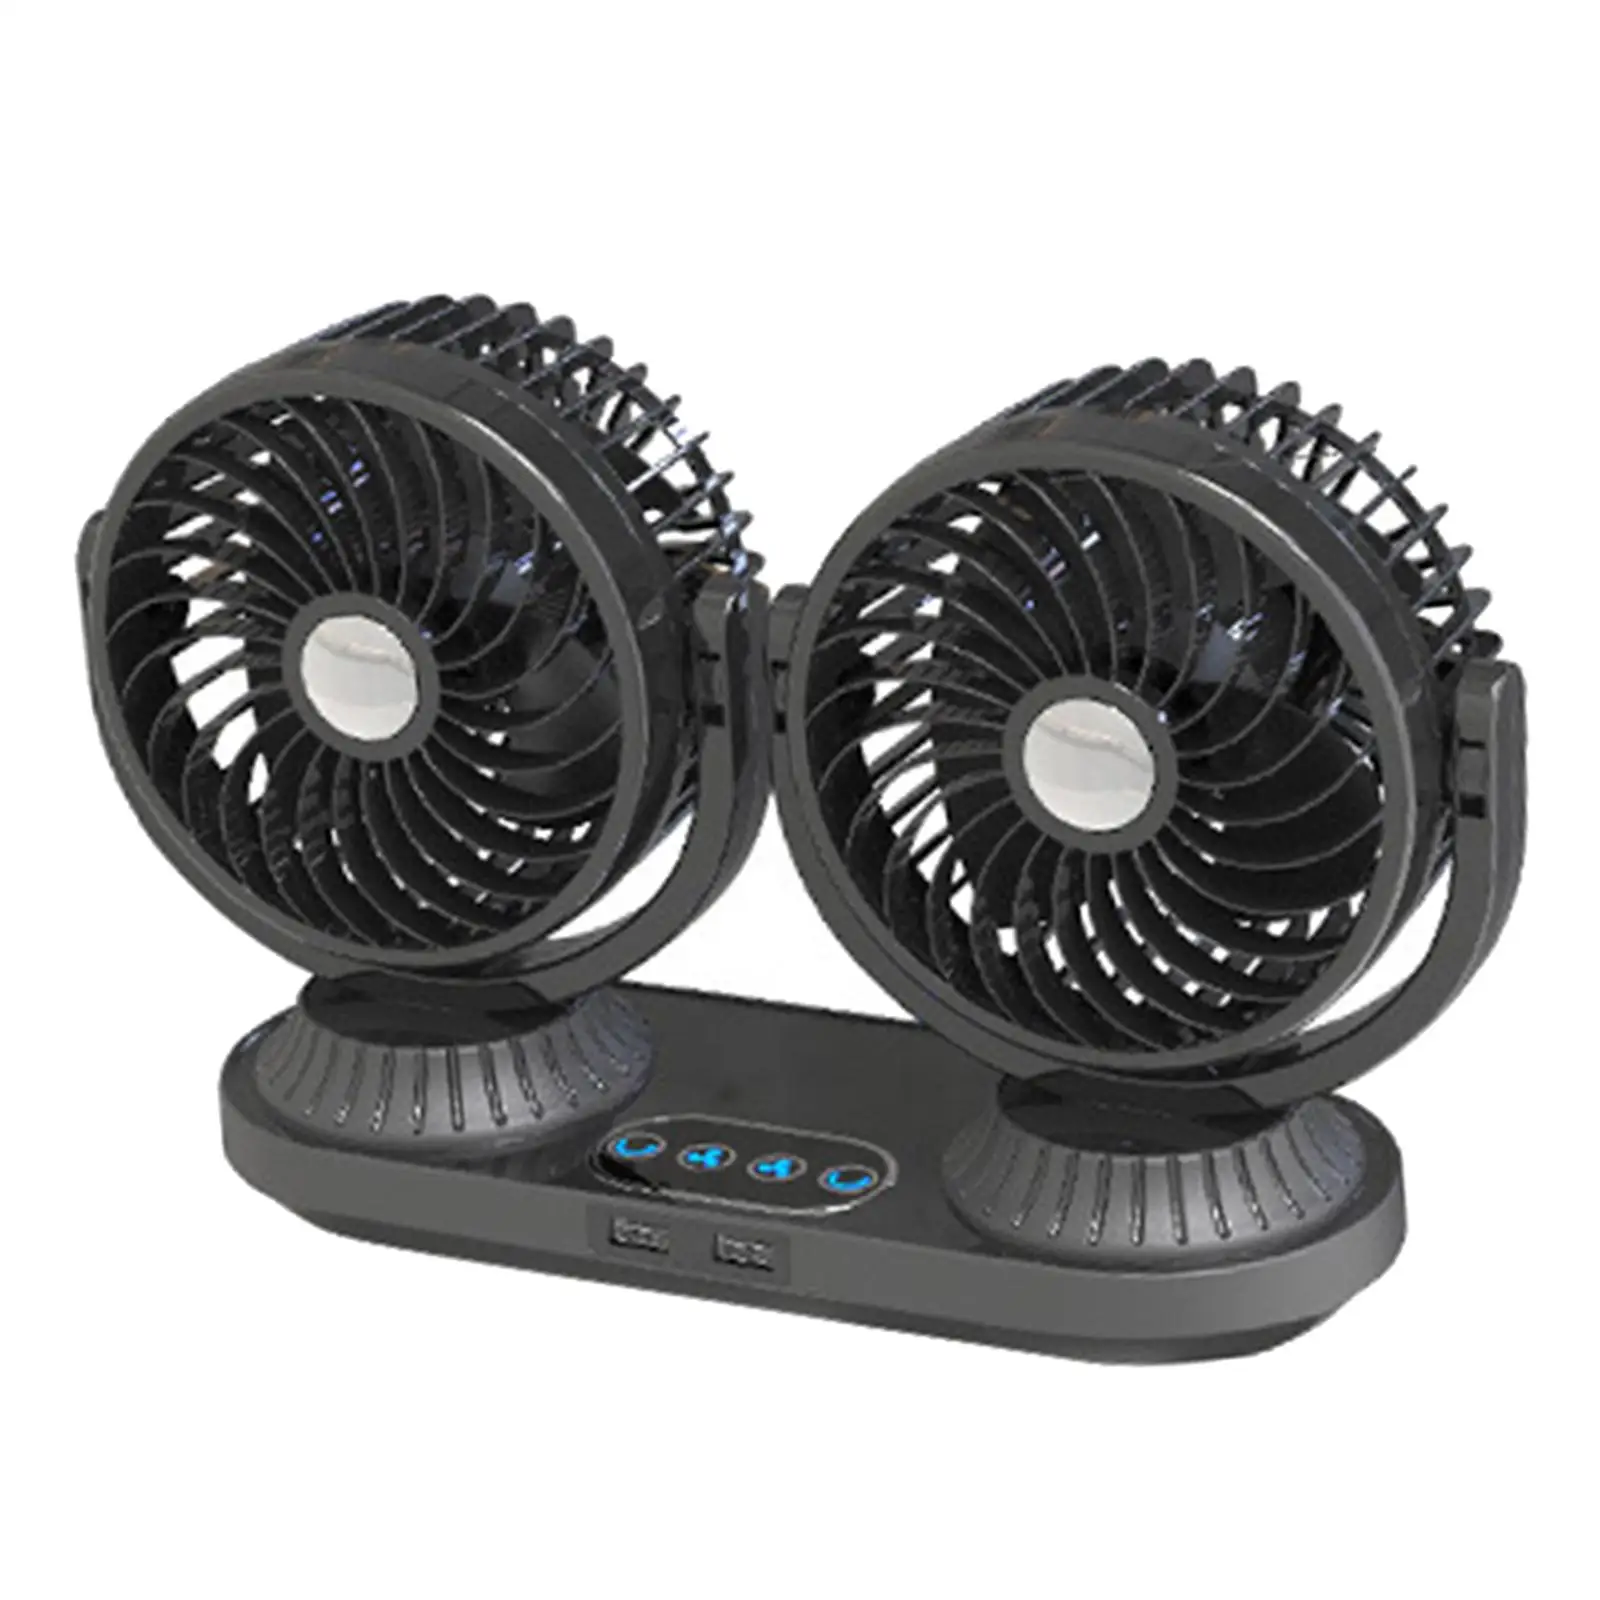 Dual Heads Car Fan for 12V 24V Vehicles 3 Speeds Adjustable 360 Degree Rotating Portable Dashboard Air Cooler Auto Cooling Fan